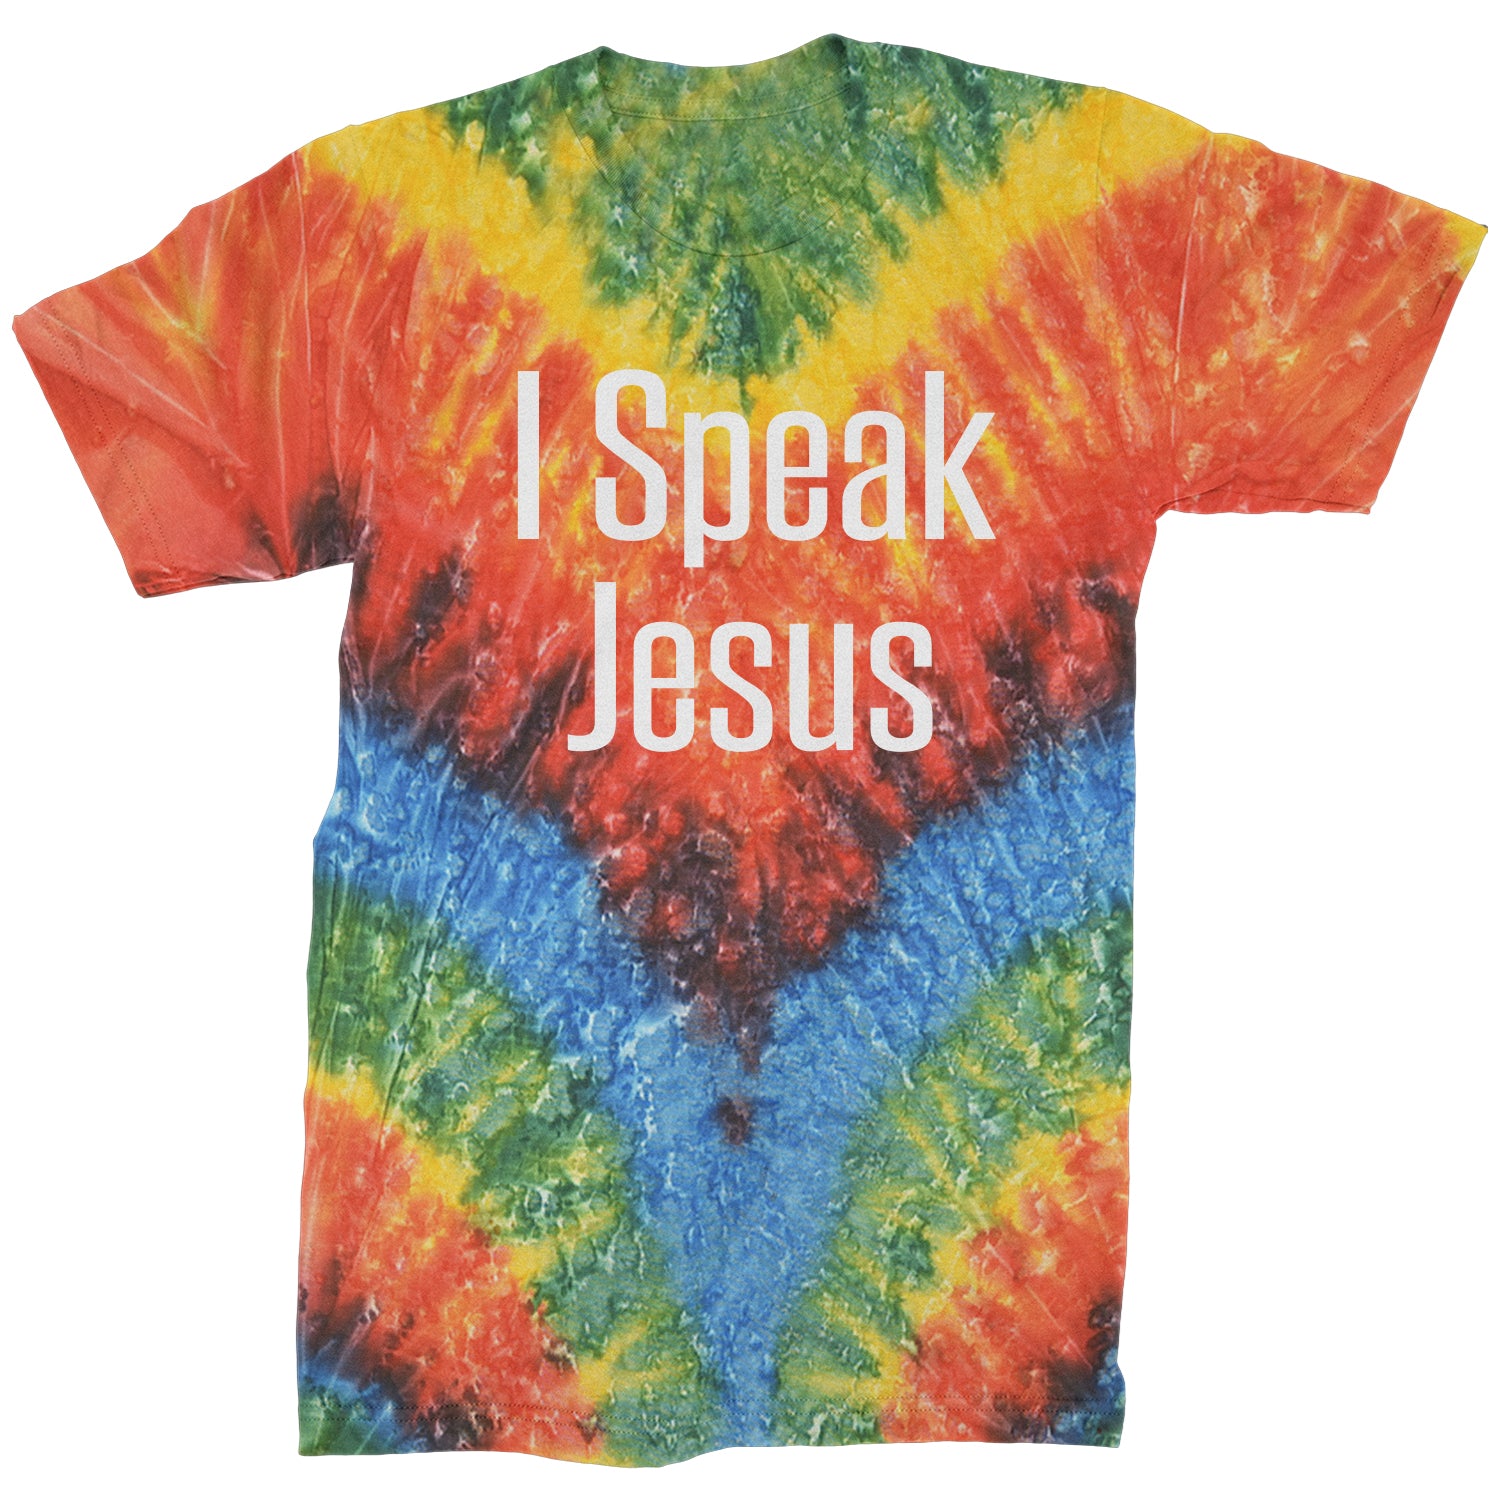 I Speak Jesus Mens T-shirt catholic, charity, christ, christian, christianity, city, concert, gayle, heaven, in, maverick, only, praise, scars, worship by Expression Tees